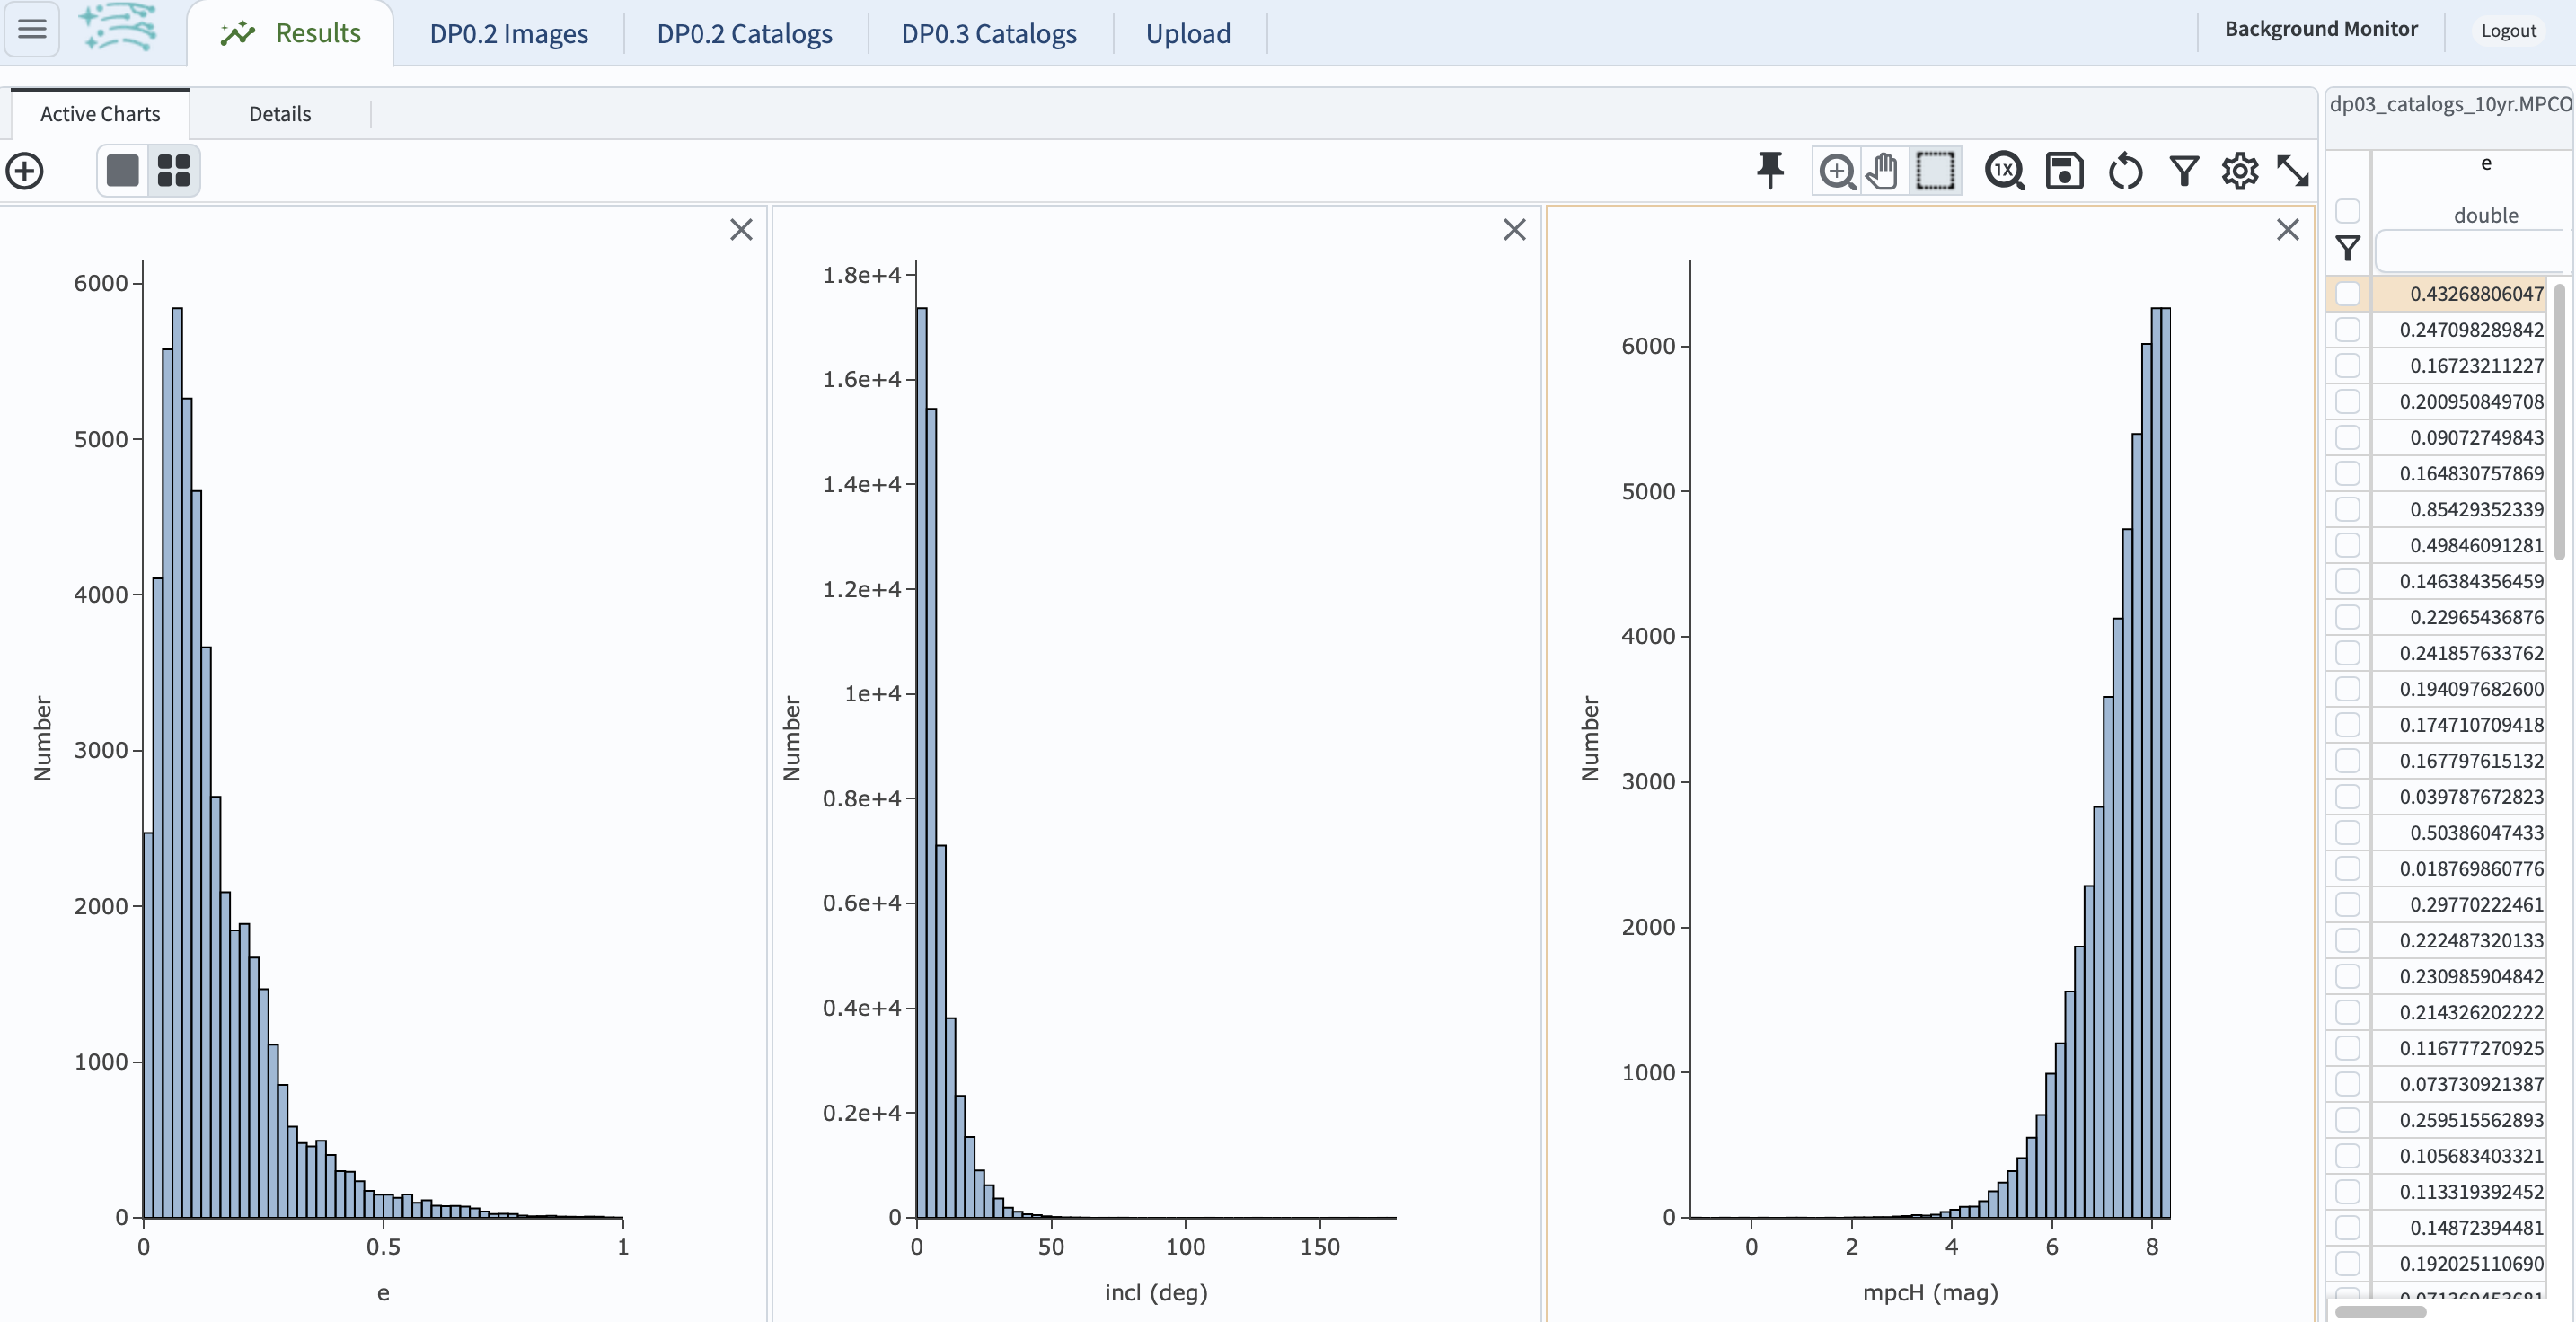 A screenshot of the Portal view with three histograms on the right and a narrow table on the left.